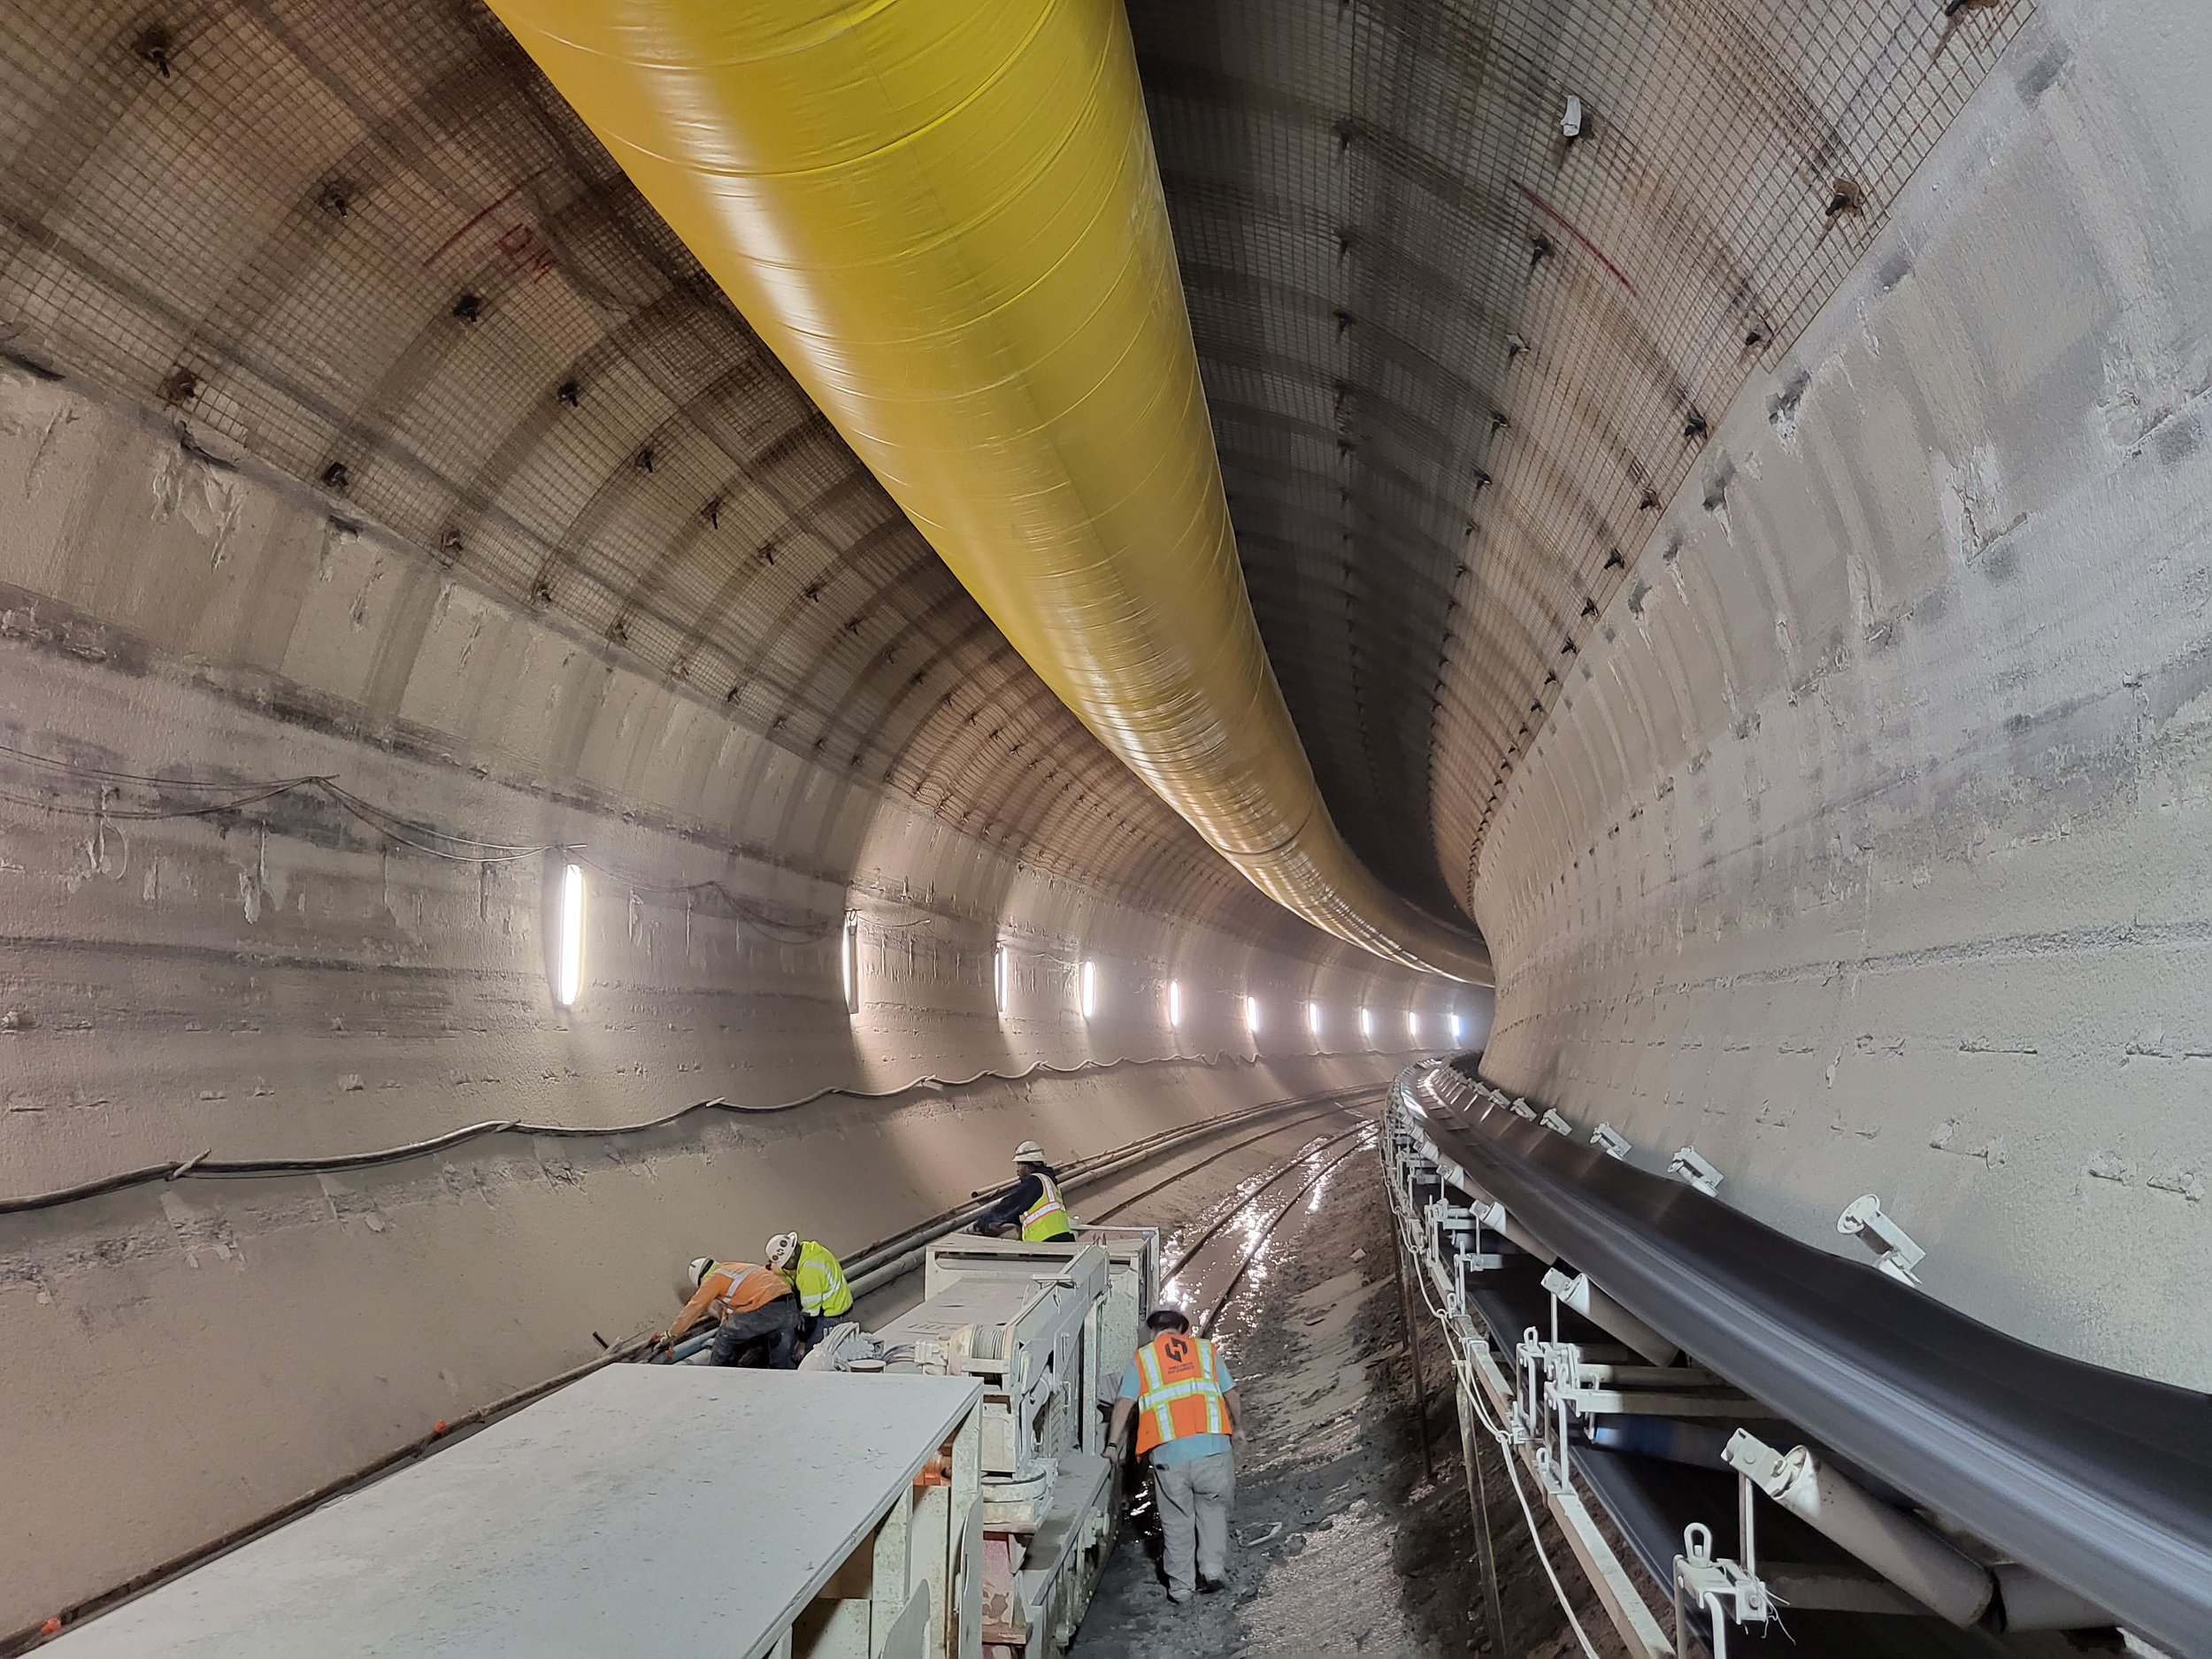 March 2022 - 32.58-ft. Diameter Tunnel